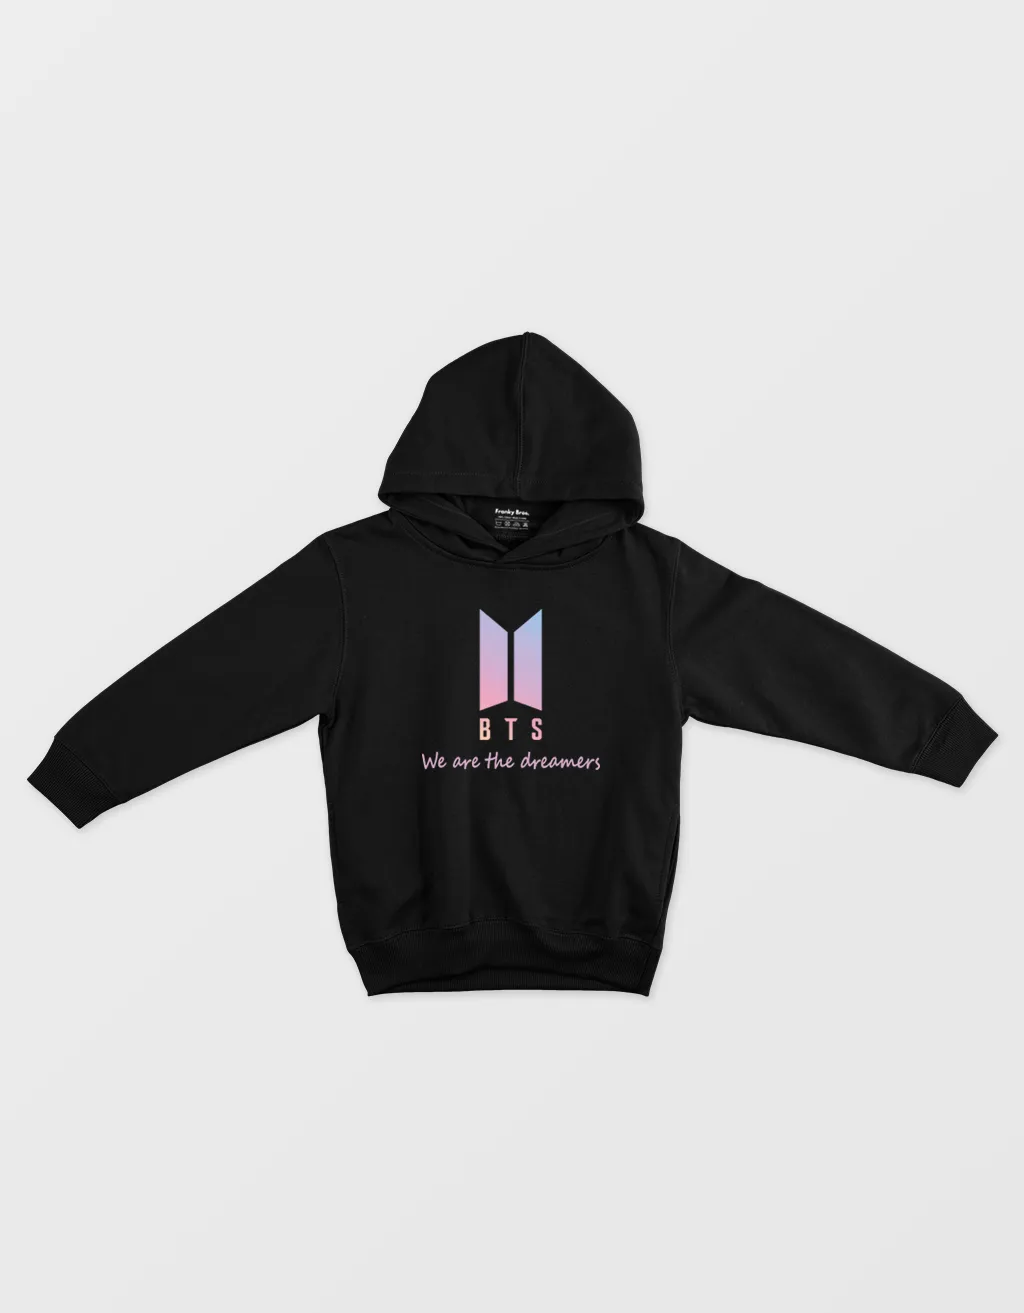 bts hoodie for girls and boys under 500 online india